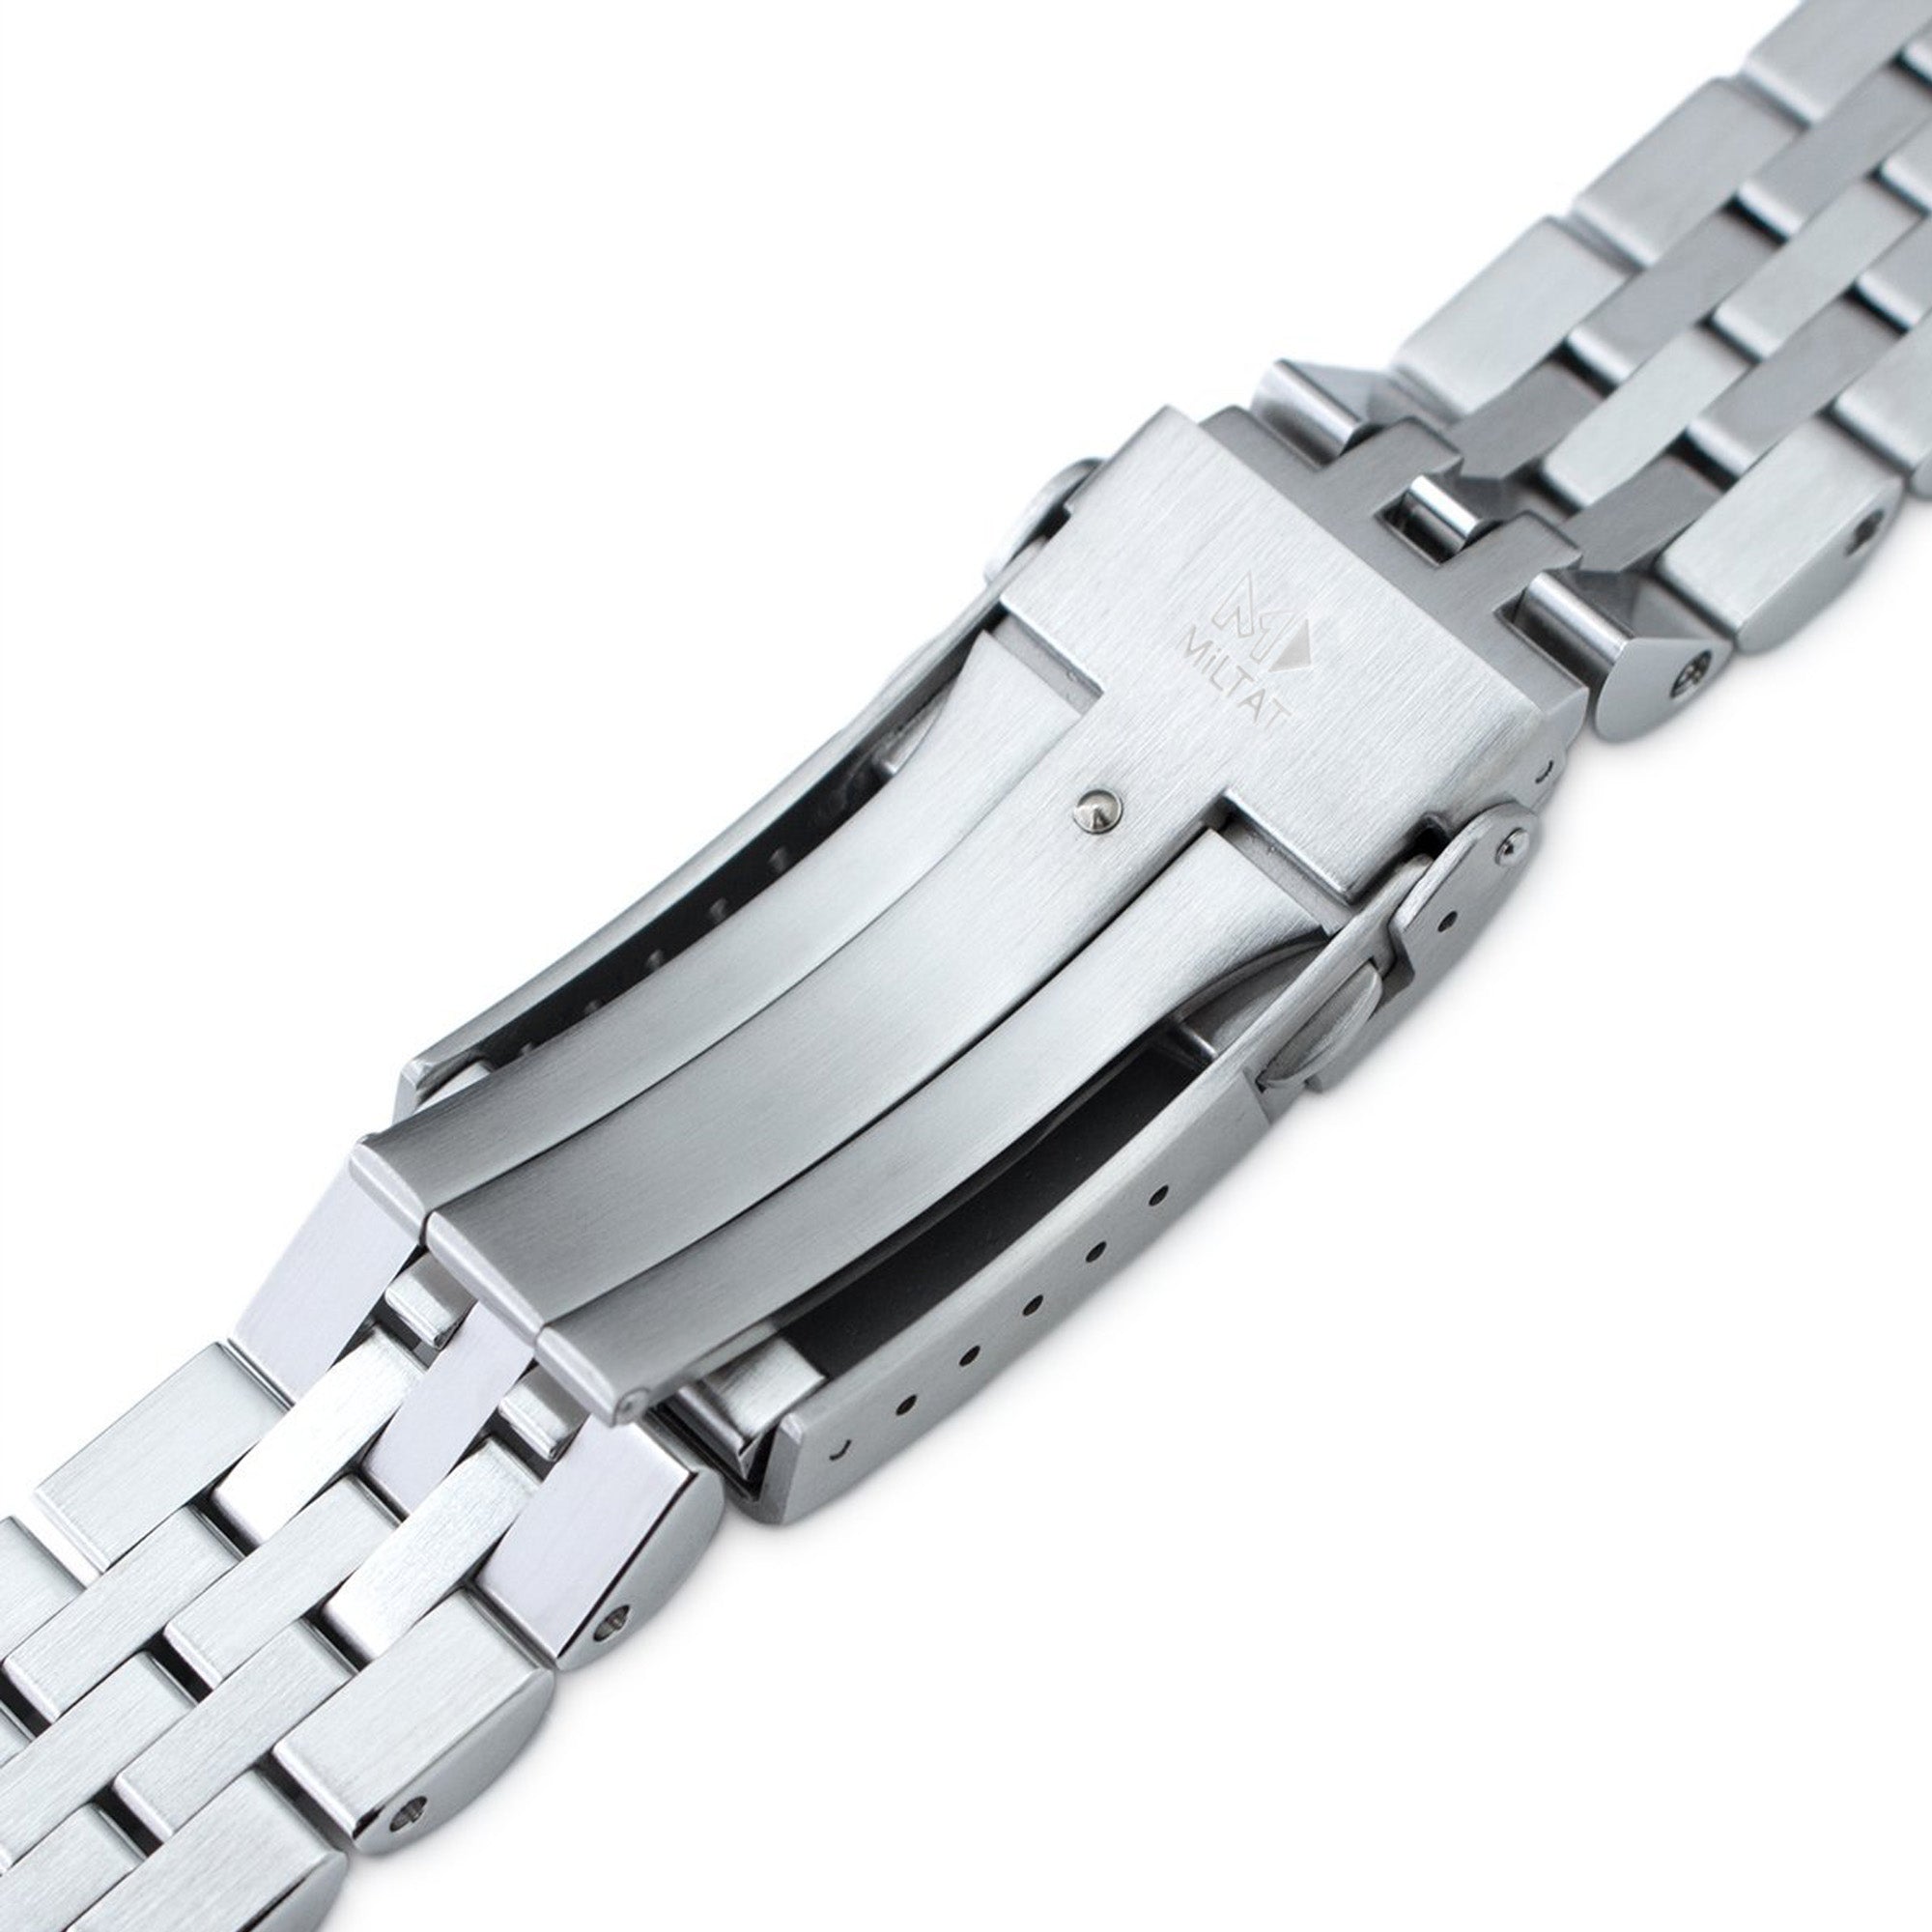 20mm Angus-J Louis JUB Watch Band compatible with Seiko SBDC053 aka modern 62MAS, 316L Stainless Steel